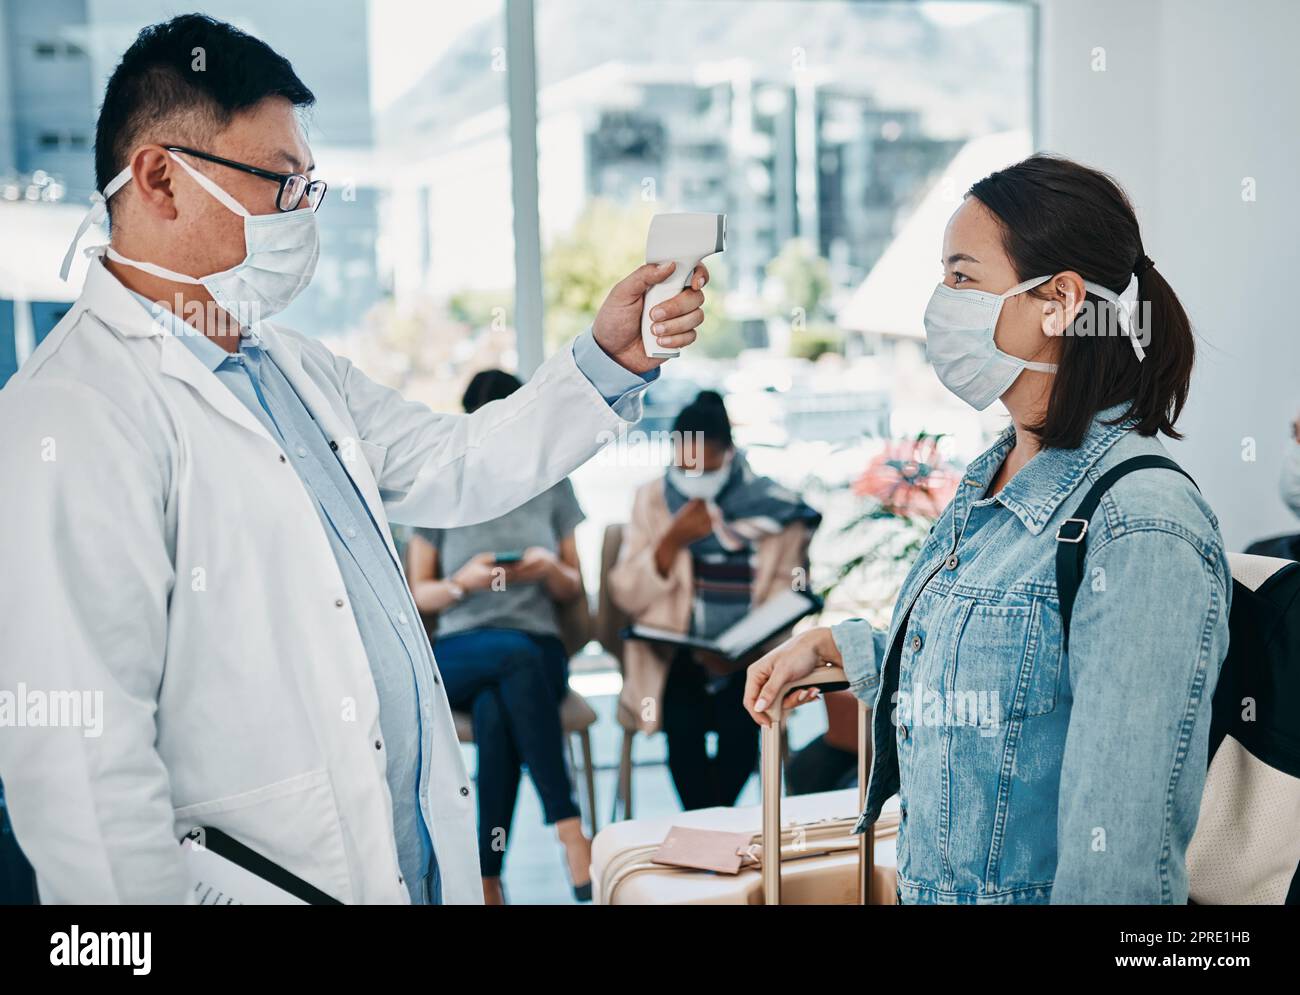 Covid traveling with a doctor taking temperature of a woman wearing a mask in an airport for safety in a pandemic. Healthcare professional with an infrared thermometer following travel protocol Stock Photo